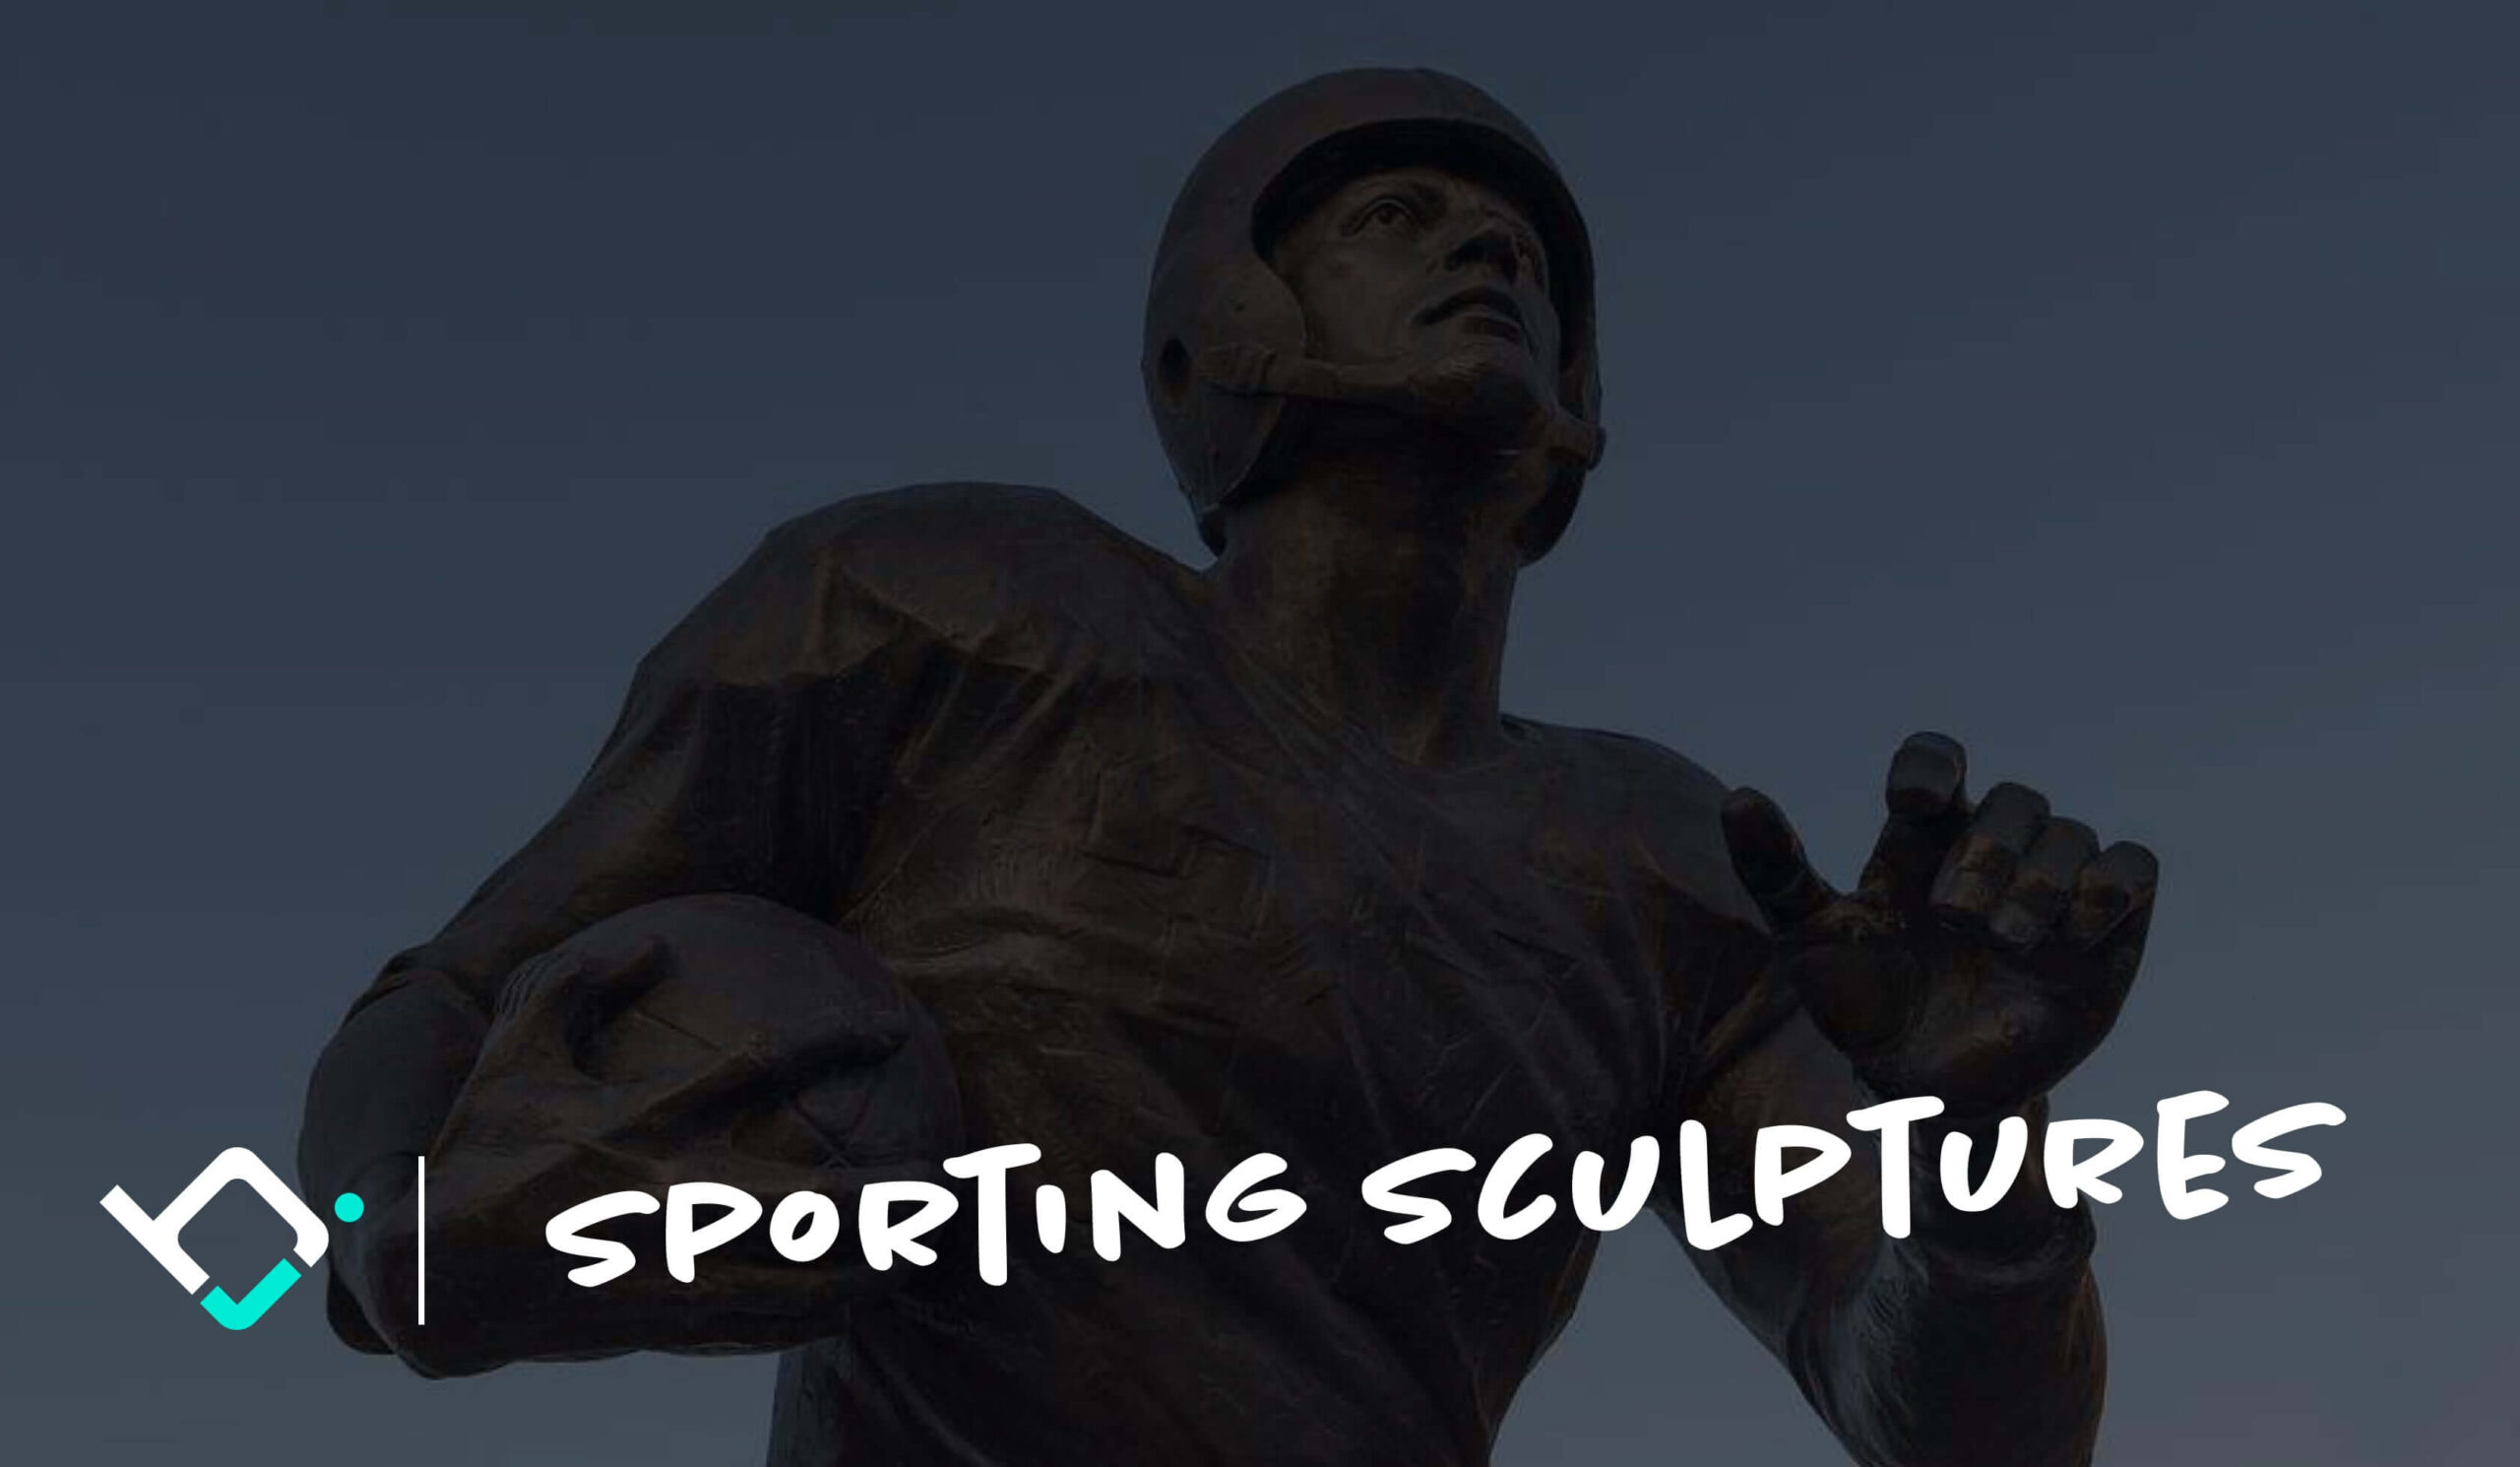 Which State Best Commemorates Sporting Stars?